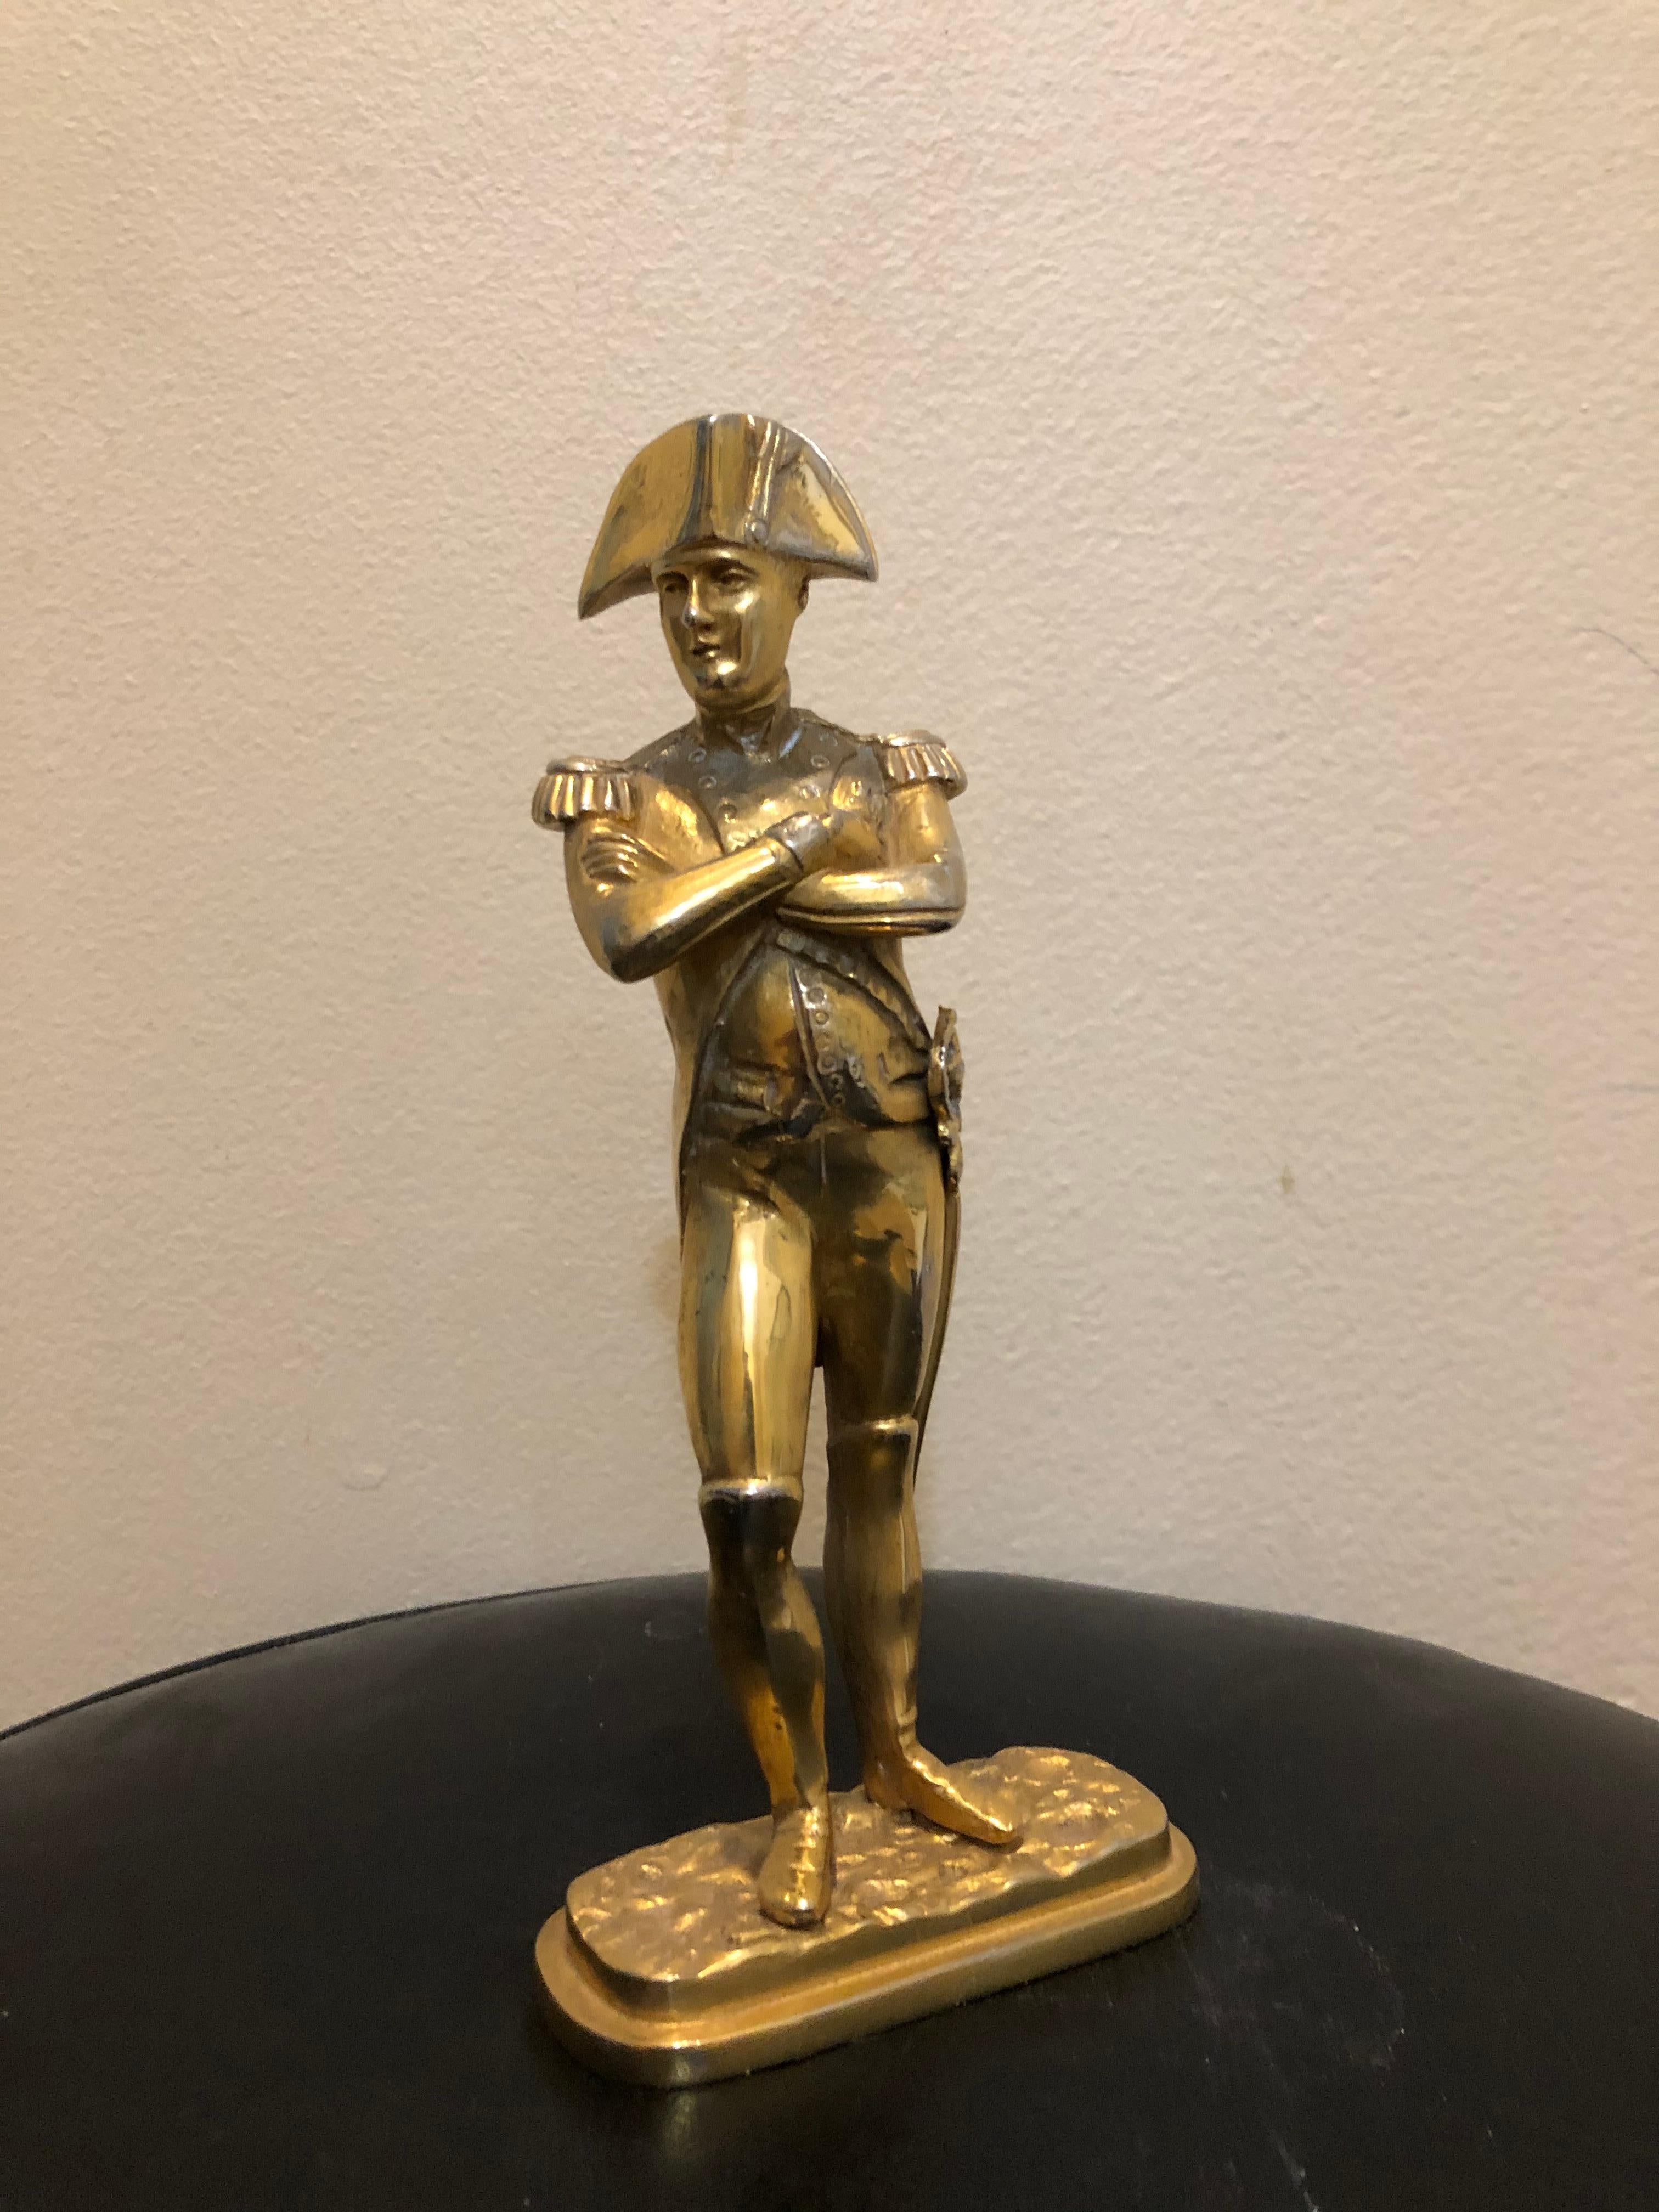 Fabulous 19th century gilt bronze Napoleon sculpture. Extremely detailed bronze of Napoleon Bonaparte. It measures: 9 inches high 3 3/4 inches wide and 2 inches deep. It is in excellent original condition.